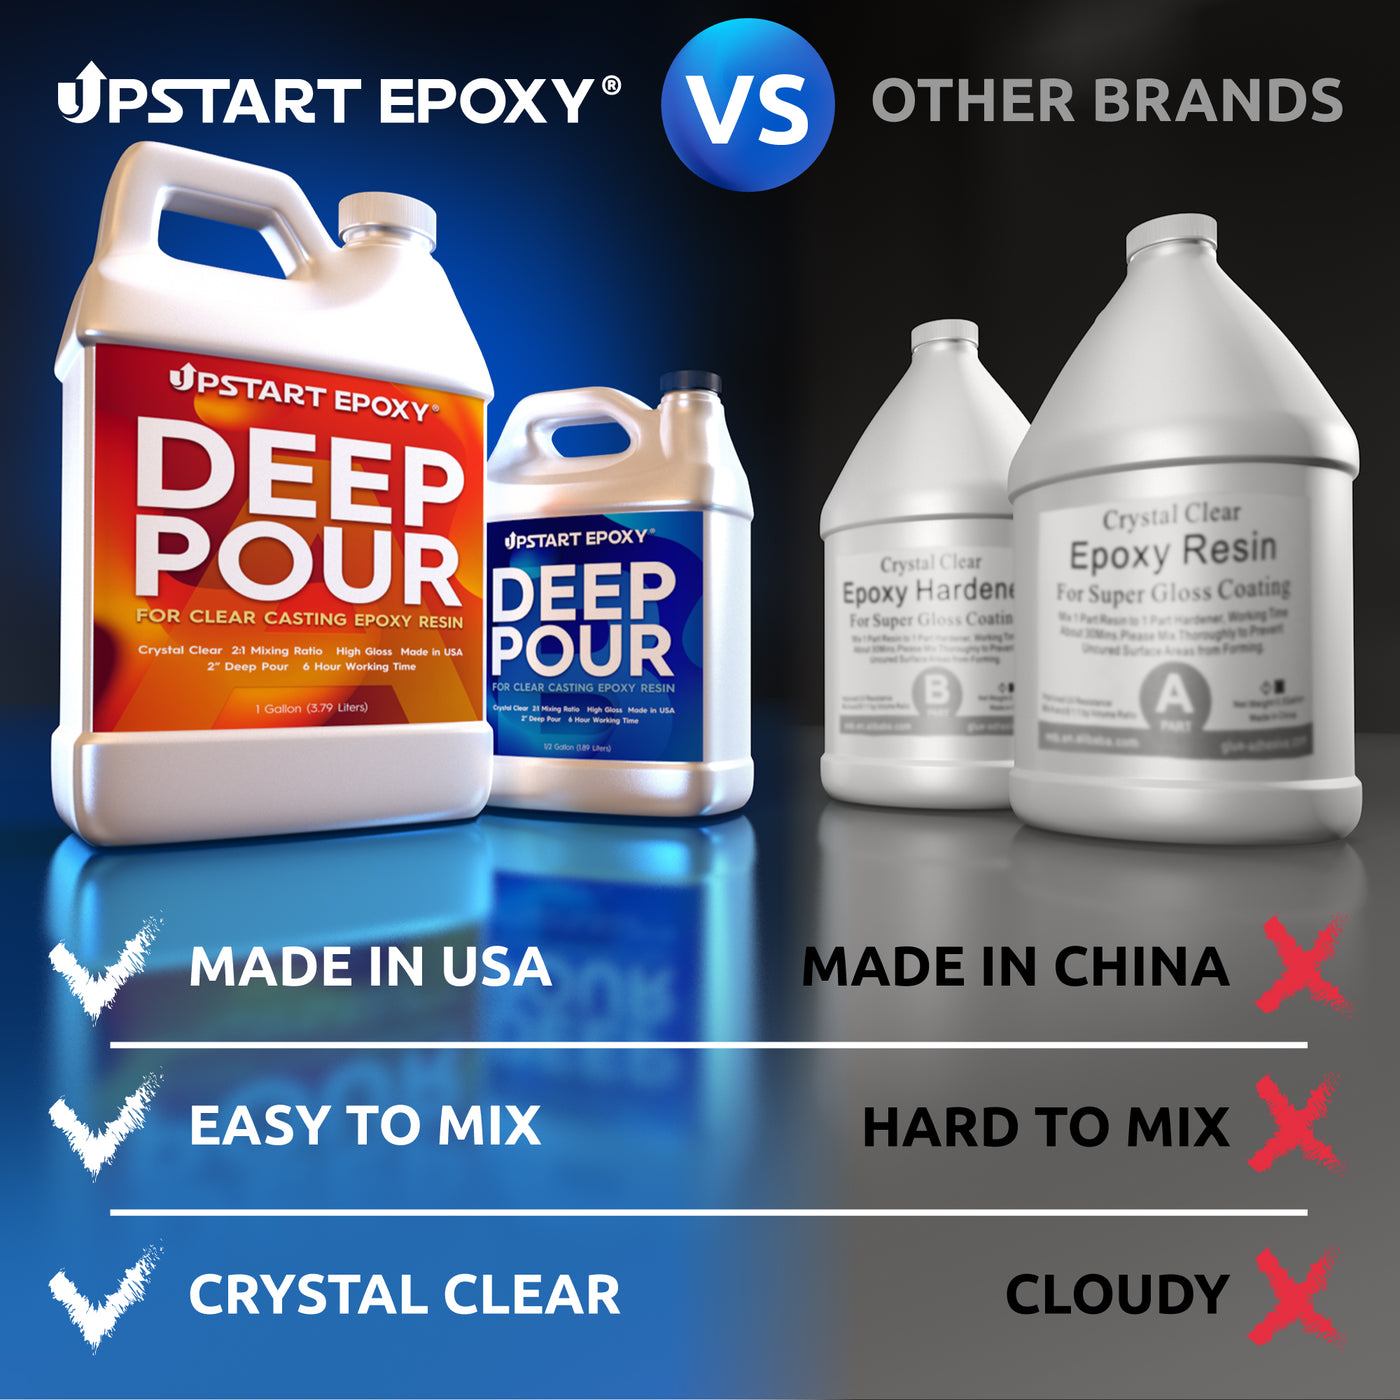 UpStart Epoxy 2 Deep Pour Epoxy Resin Kit DIY - Made in USA - Super Ultra Clear